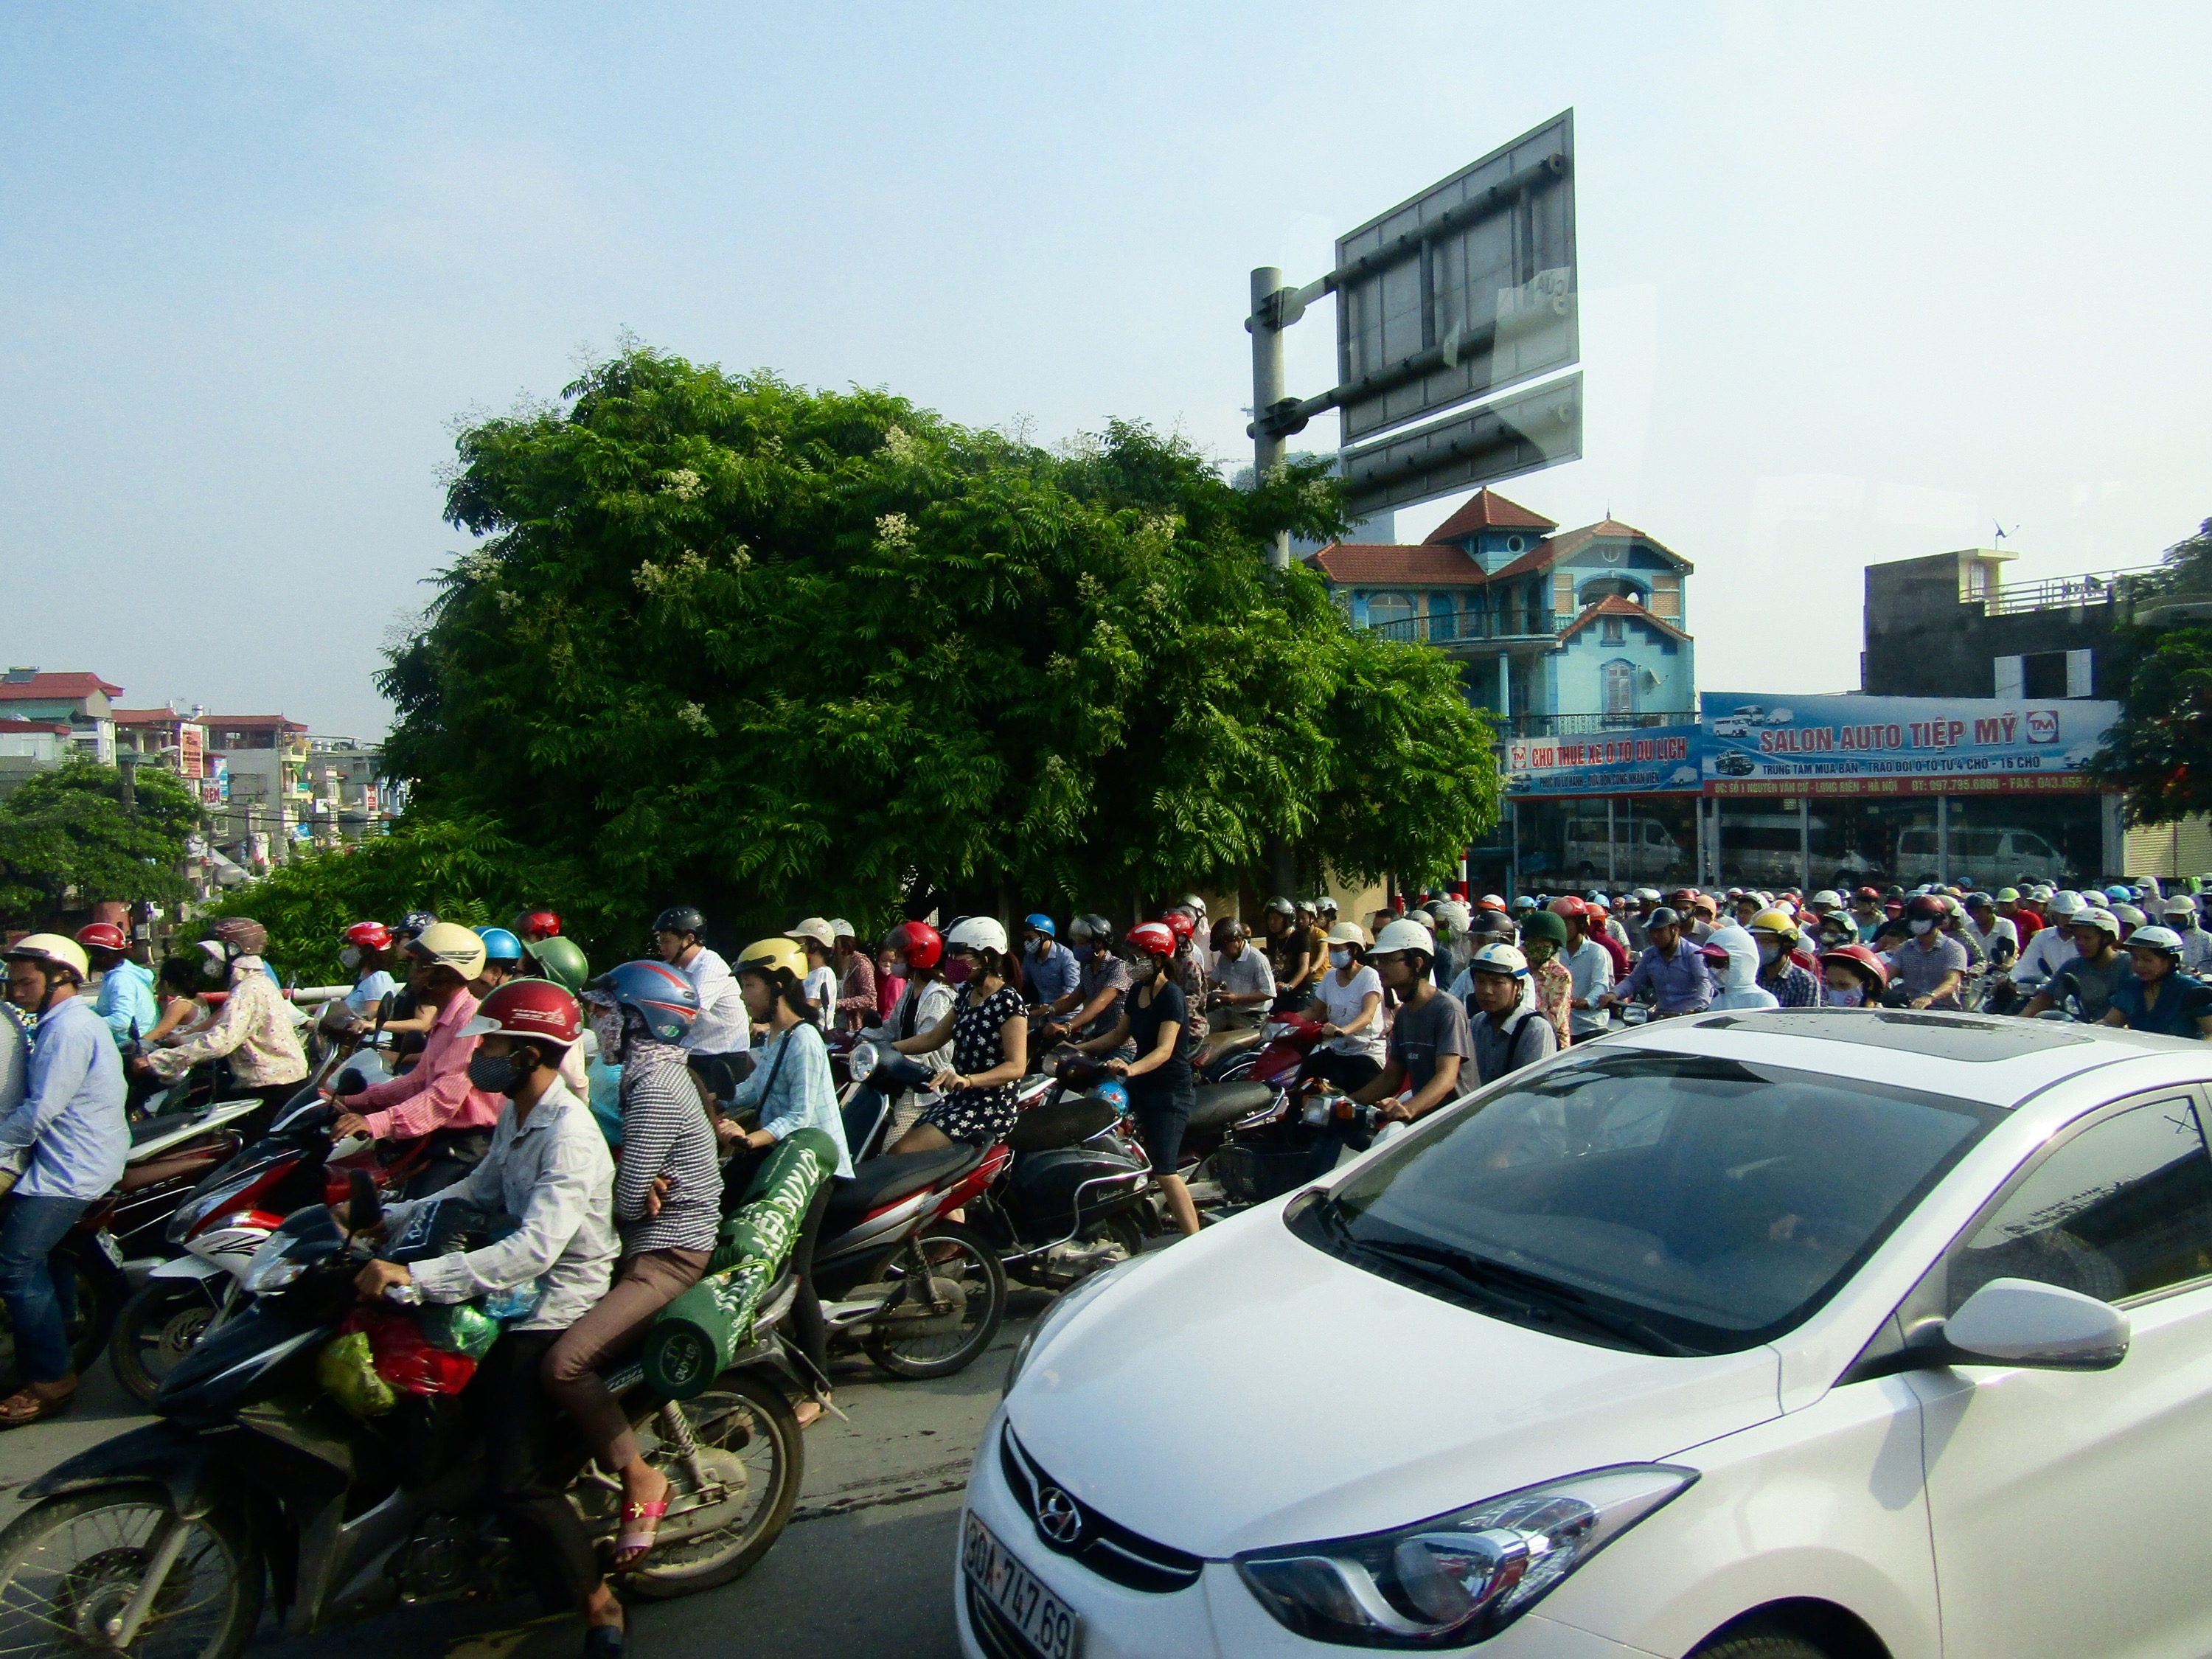 We left for Halong Bay during Hanoi's morning rush hour. High taxes on automobiles make scooters and motorbikes the preferred mode of transportation among the nearly 3 million Hanoians.